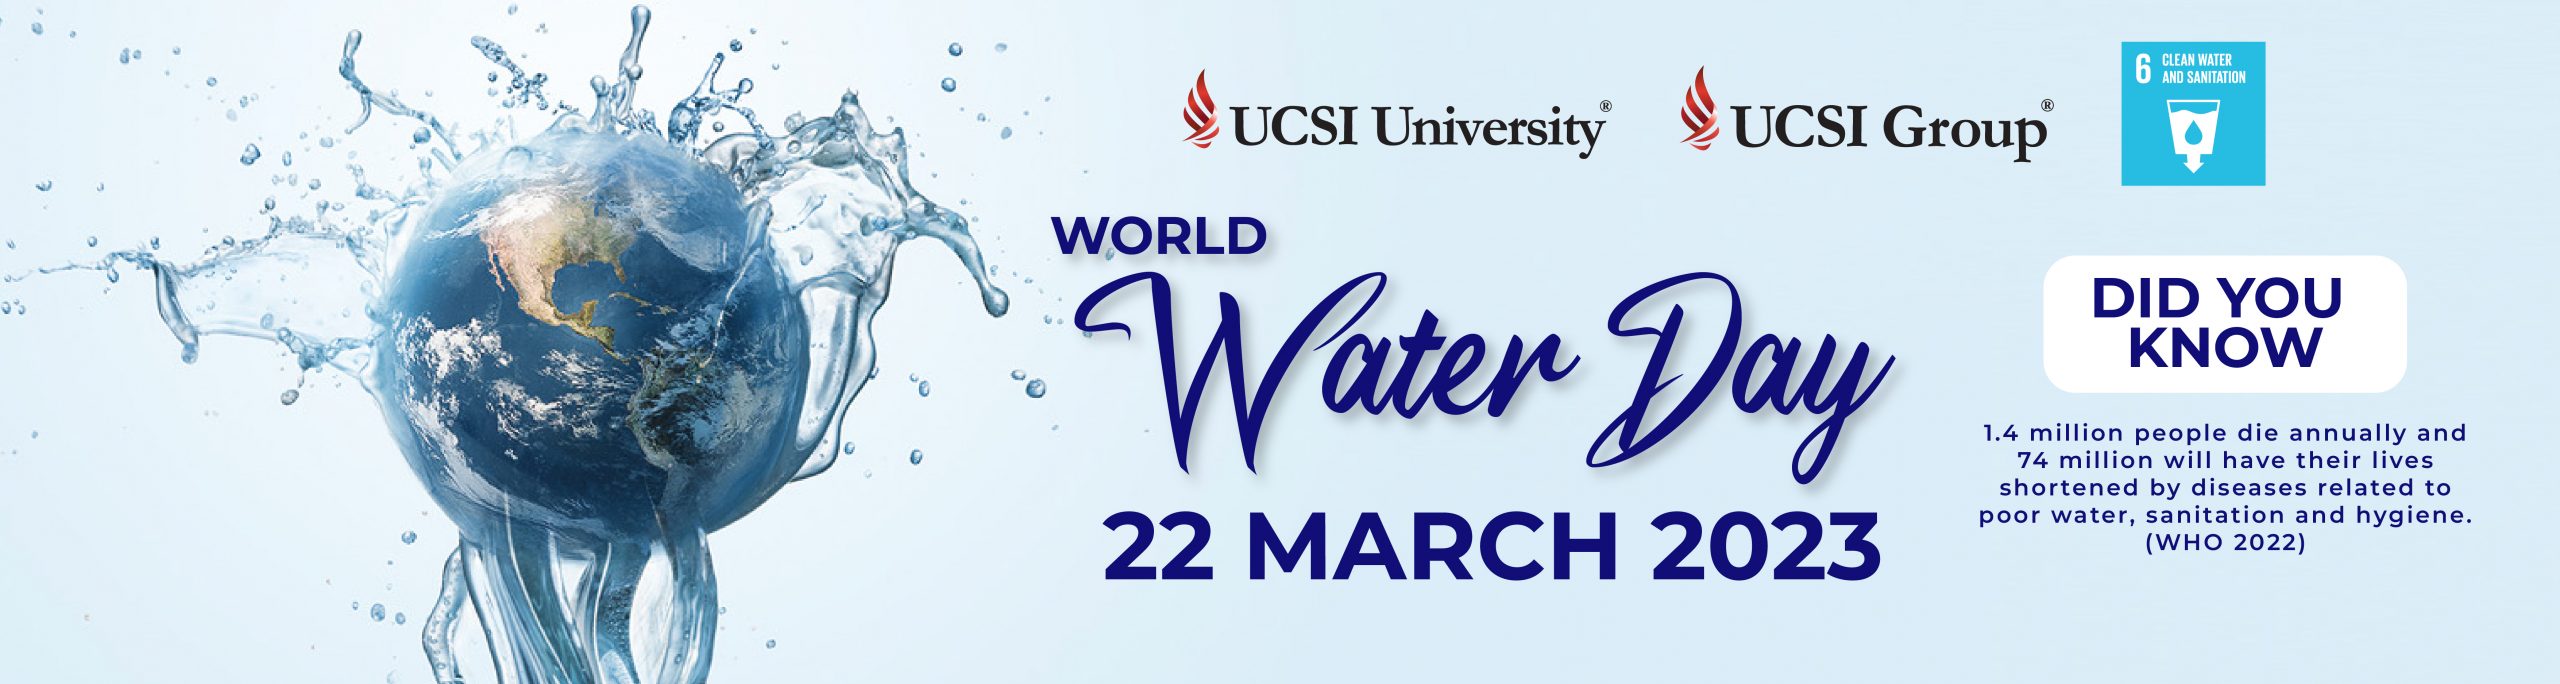 Water day_web banner